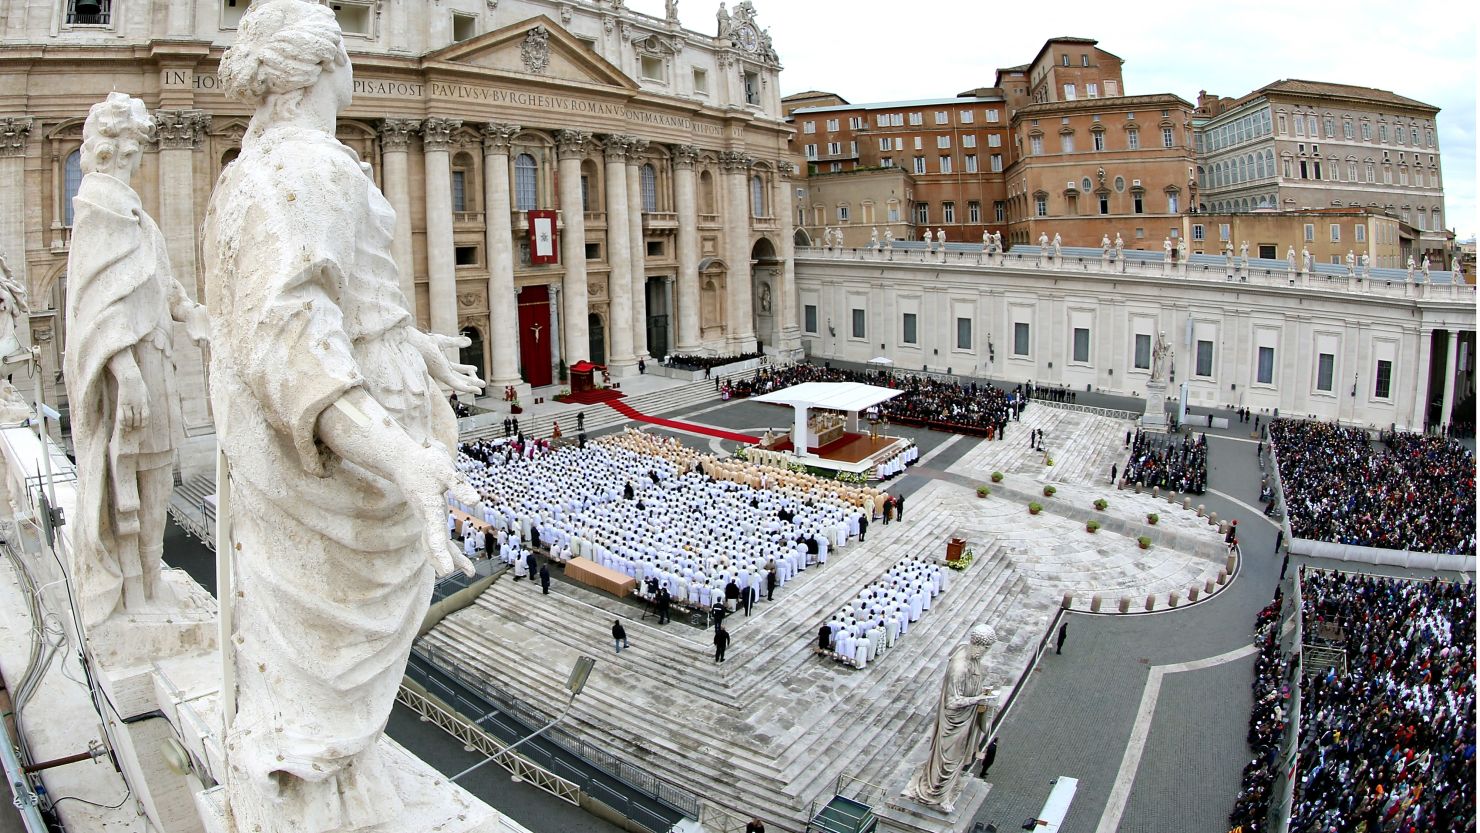 People gather during the end of the Solemnity of Christ the King in St. Peter's square on November 24, 2013 in Vatican City.